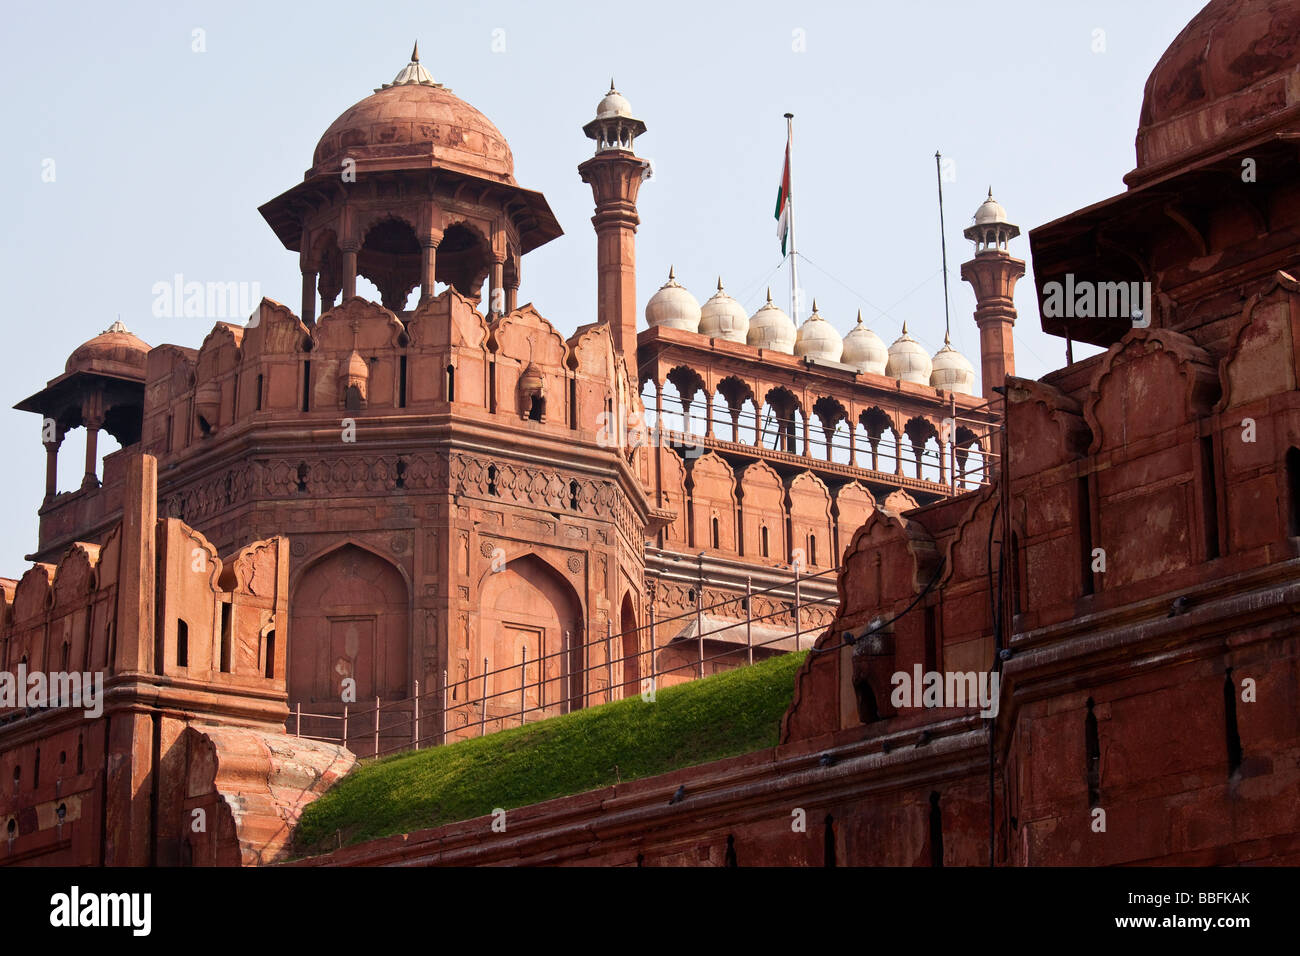 Lahore Gate of the Lal Qila or Red Fort in Old Delhi India Stock Photo